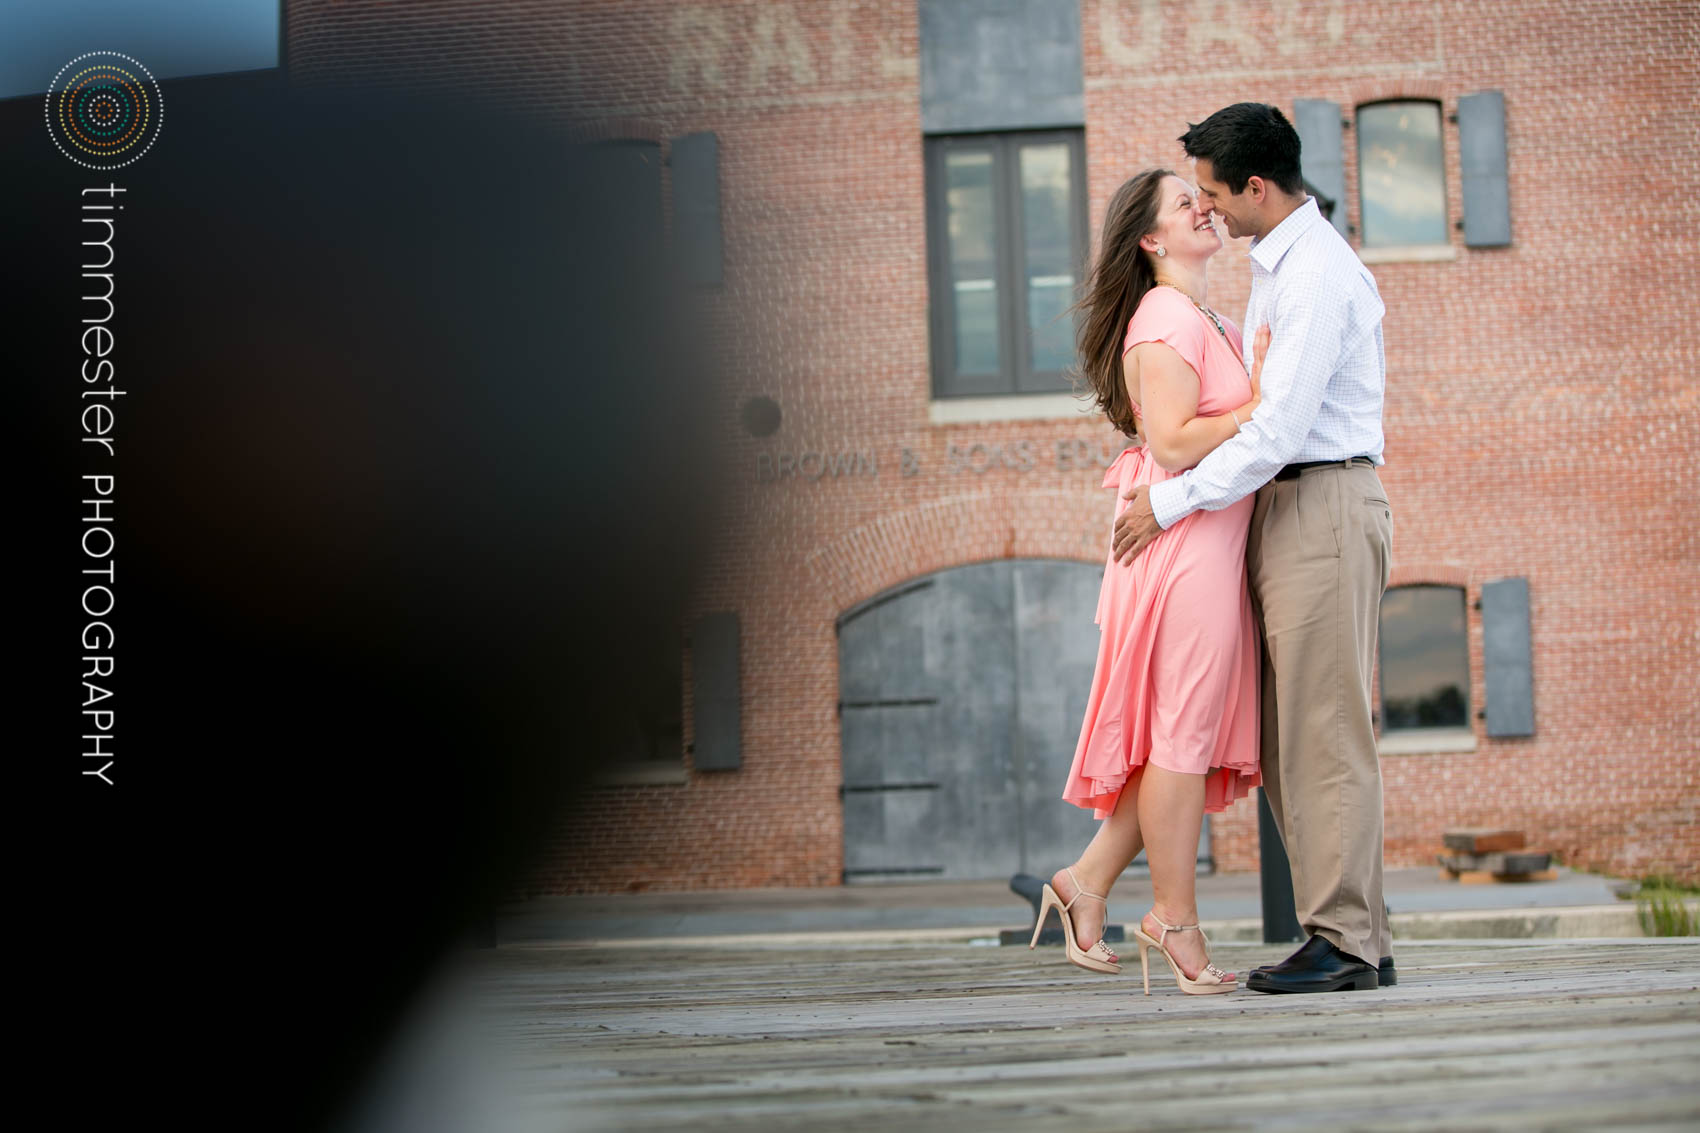 Fells Point Baltimore Engagement_Timmester Photography_002